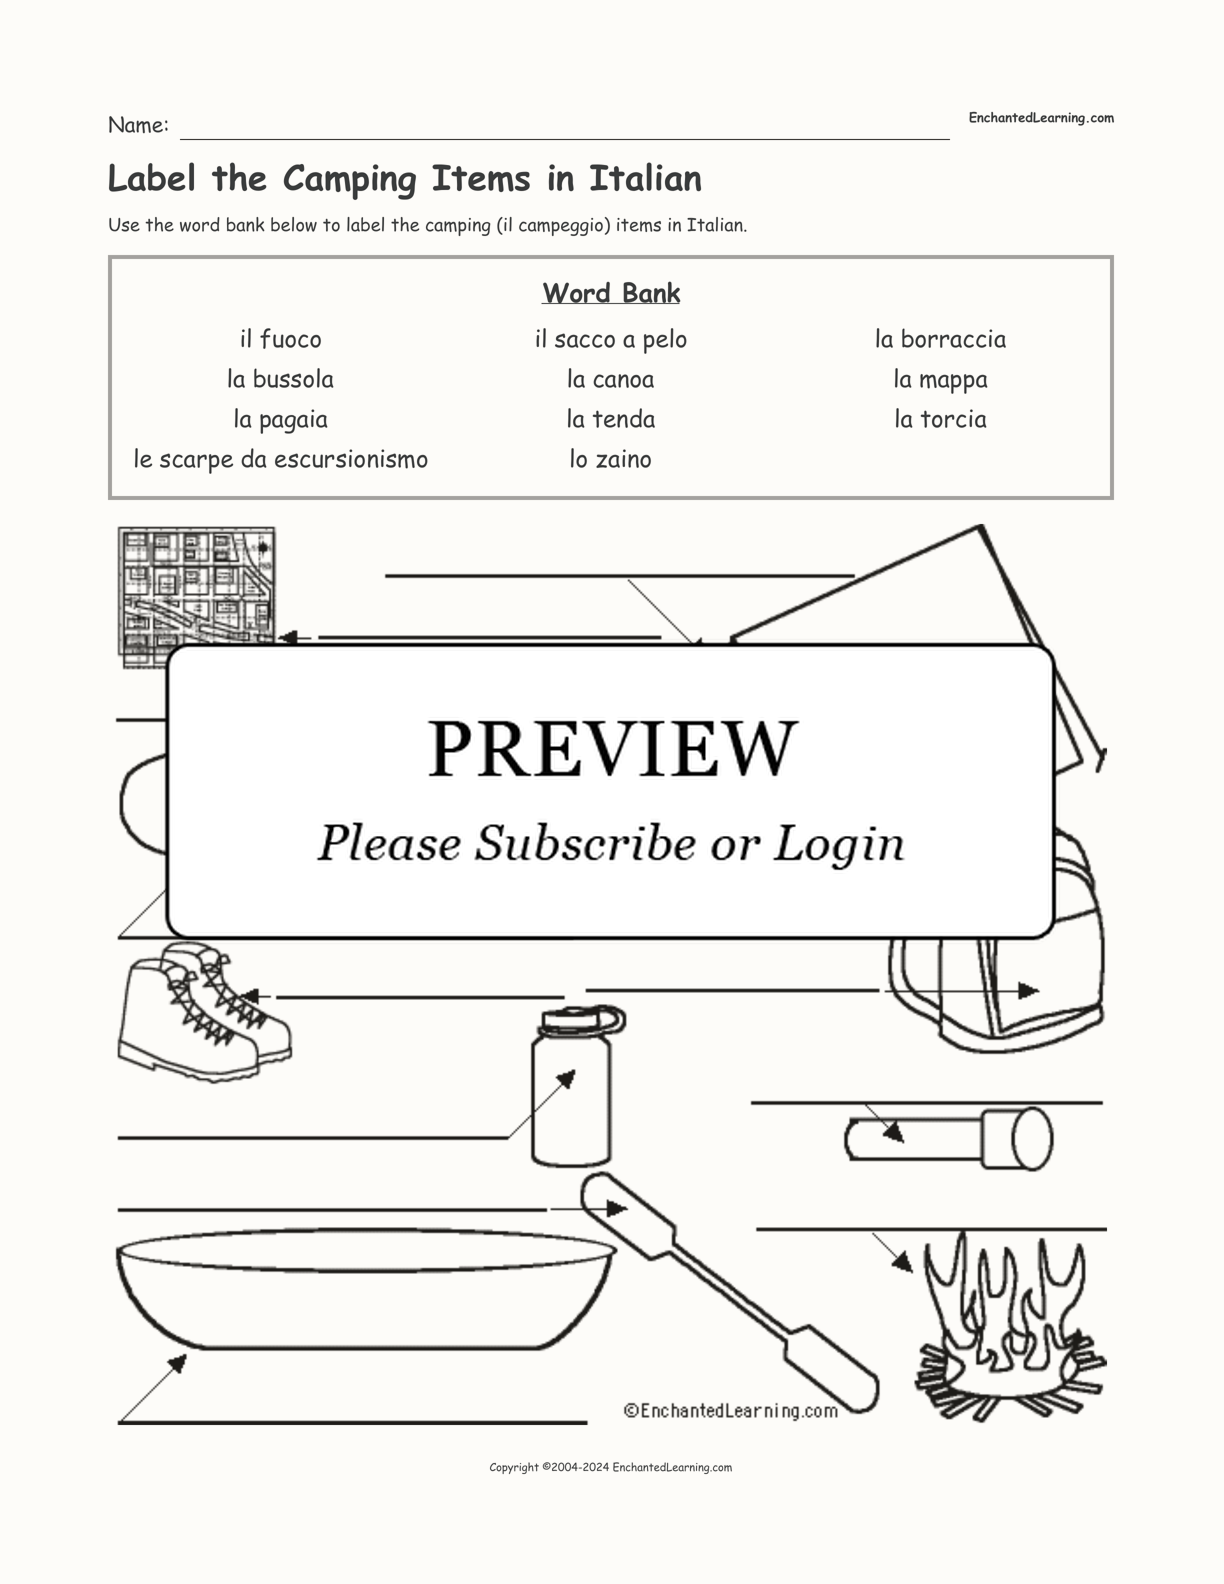 Label the Camping Items in Italian interactive worksheet page 1